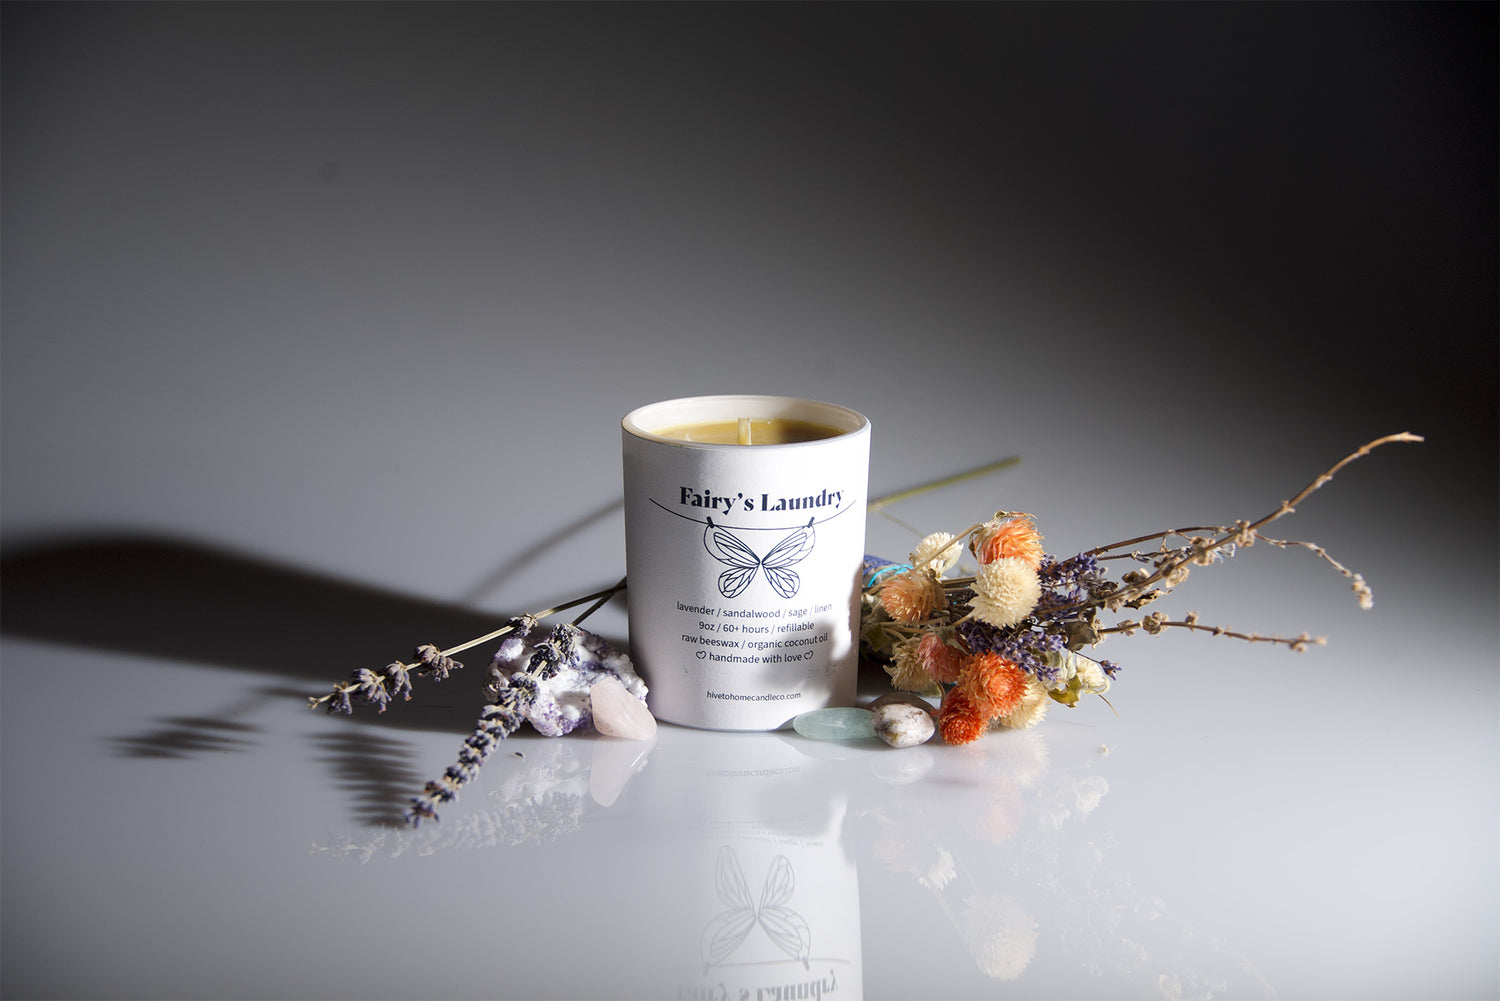 Fairy's Laundry. Beeswax candle with lavender & sandalwood with hints of fresh linen and sage. Featured candle image for Hive To Home Candle Co's candle scent guide.